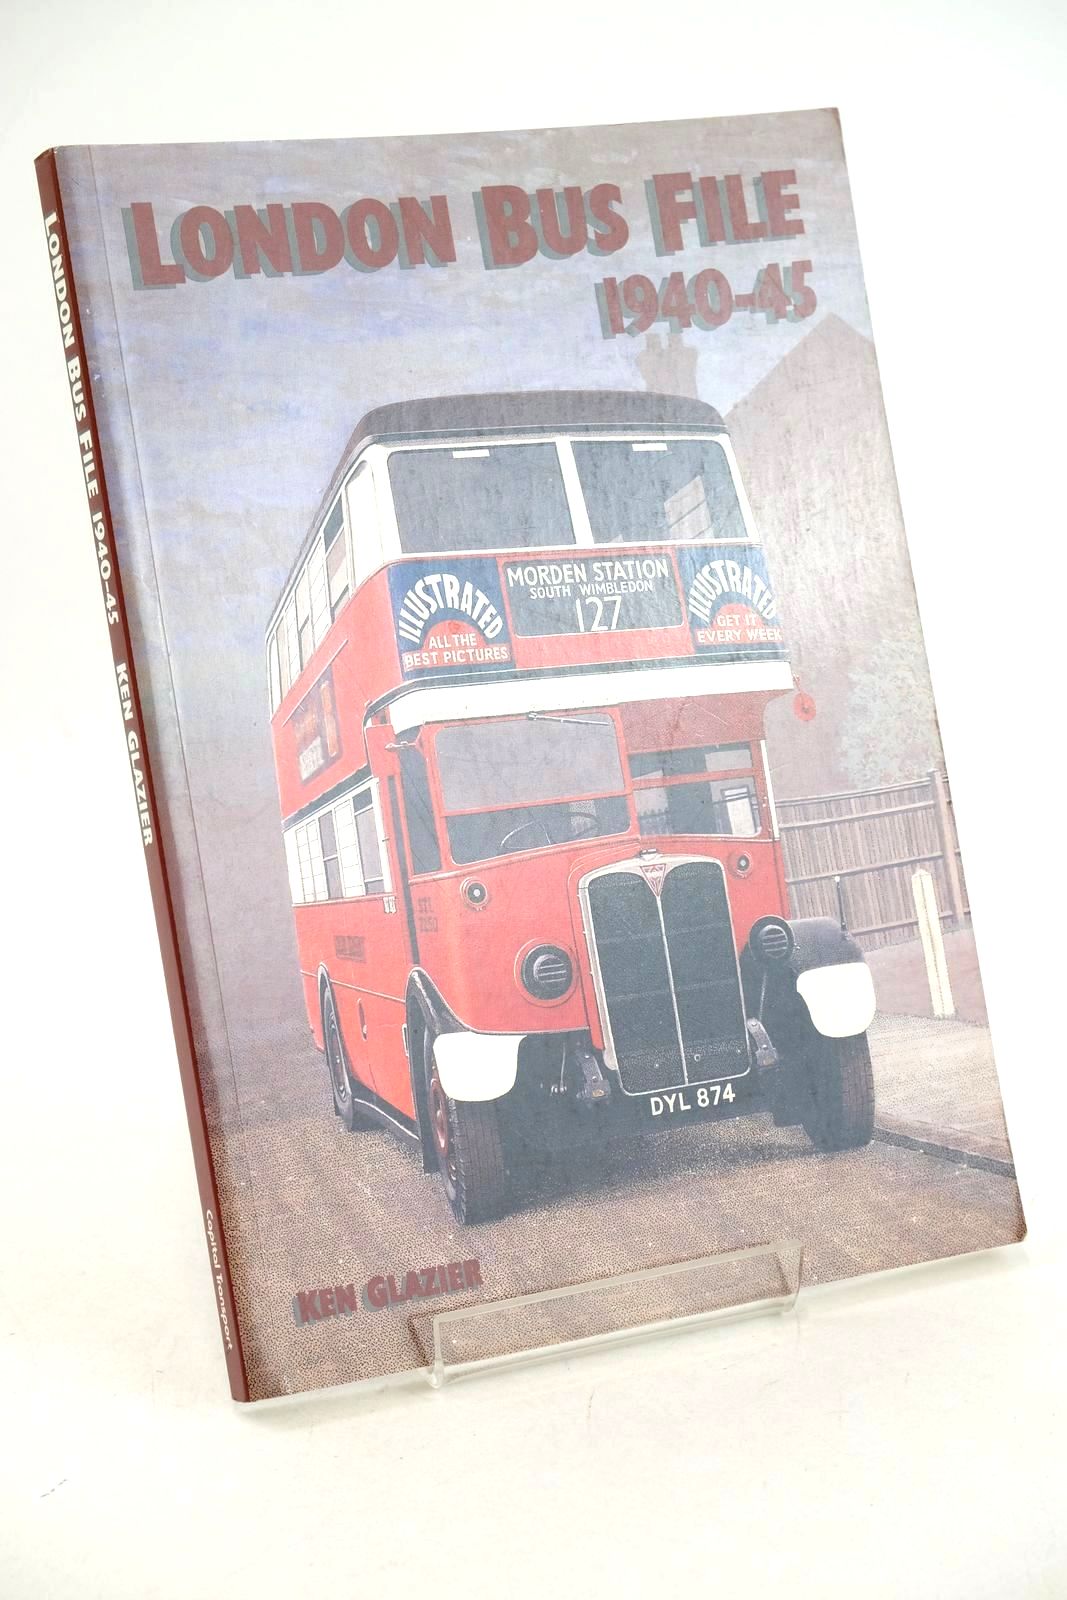 Photo of LONDON BUS FILE 1940-45 written by Glazier, Ken published by Capital Transport (STOCK CODE: 1326932)  for sale by Stella & Rose's Books